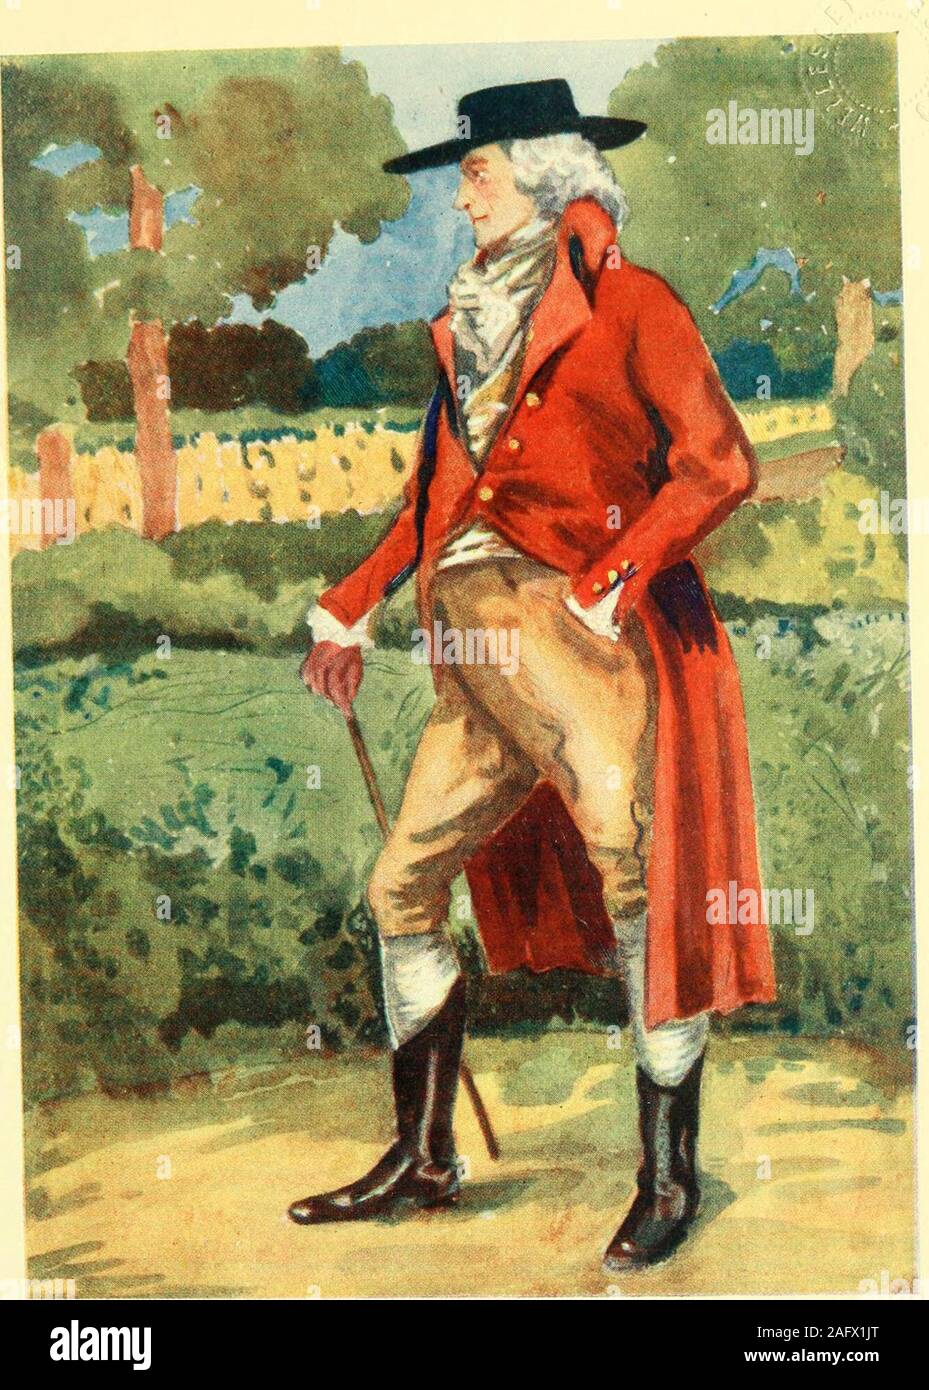 . English costume. A MAN OF THE TIME OF GEORGE III.(1760—1820) The ciifts have gone, and now the sleeve is leftunbuttoned at the wrist. The coat is long and full-skirted, but not stiffened. The cravat is loosely tied,and the frilled ends stick out. These frills were, irfthe end, made on the shirt, and were called chitterlings.. GEORGE THE THIRD 73 the shorter hair, the larger neck-cloth, the panta-loons—forerunners of Brummells invention—theopen sleeve. Number twelve shows us an ordinary gentlemanin a coat and waistcoat, with square flaps, calleddogs ears. As the drawings continue you can see Stock Photo